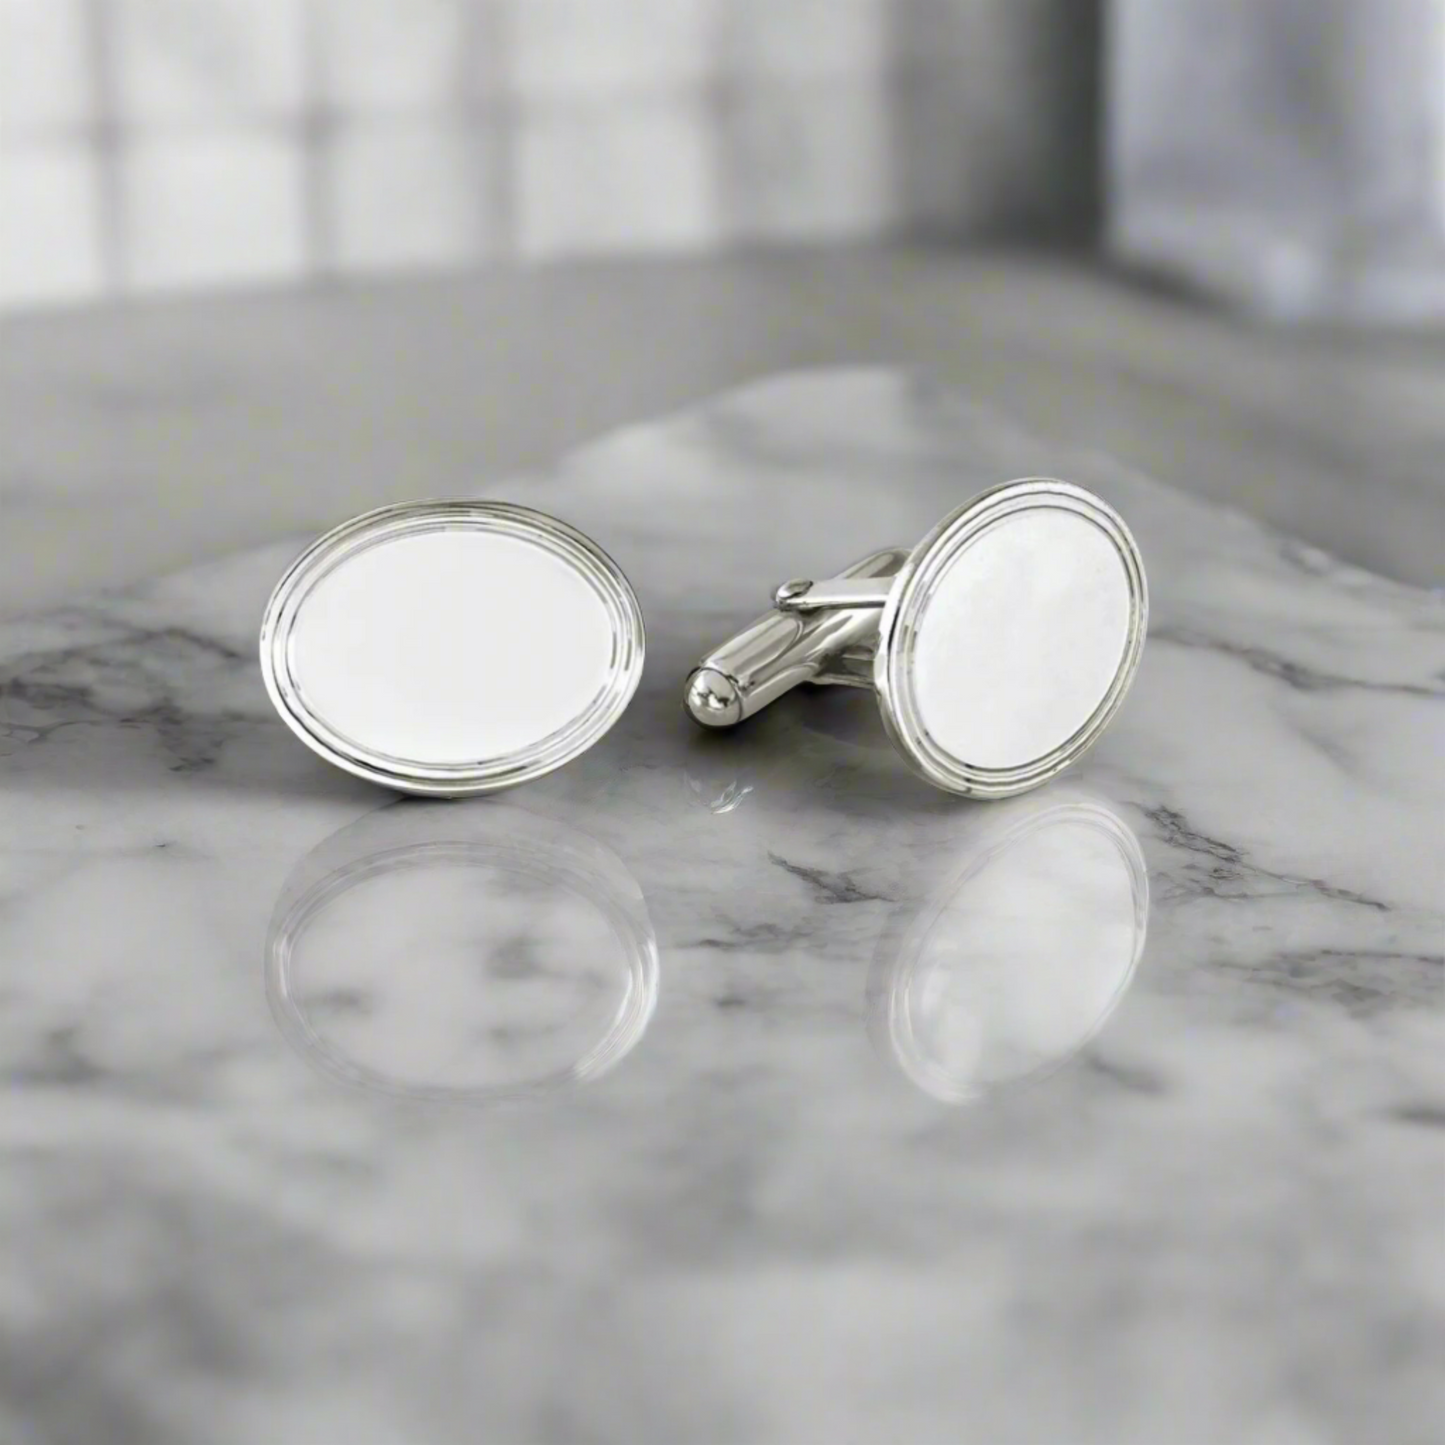 Sterling Silver Oval Cufflinks with Engine Turned Design